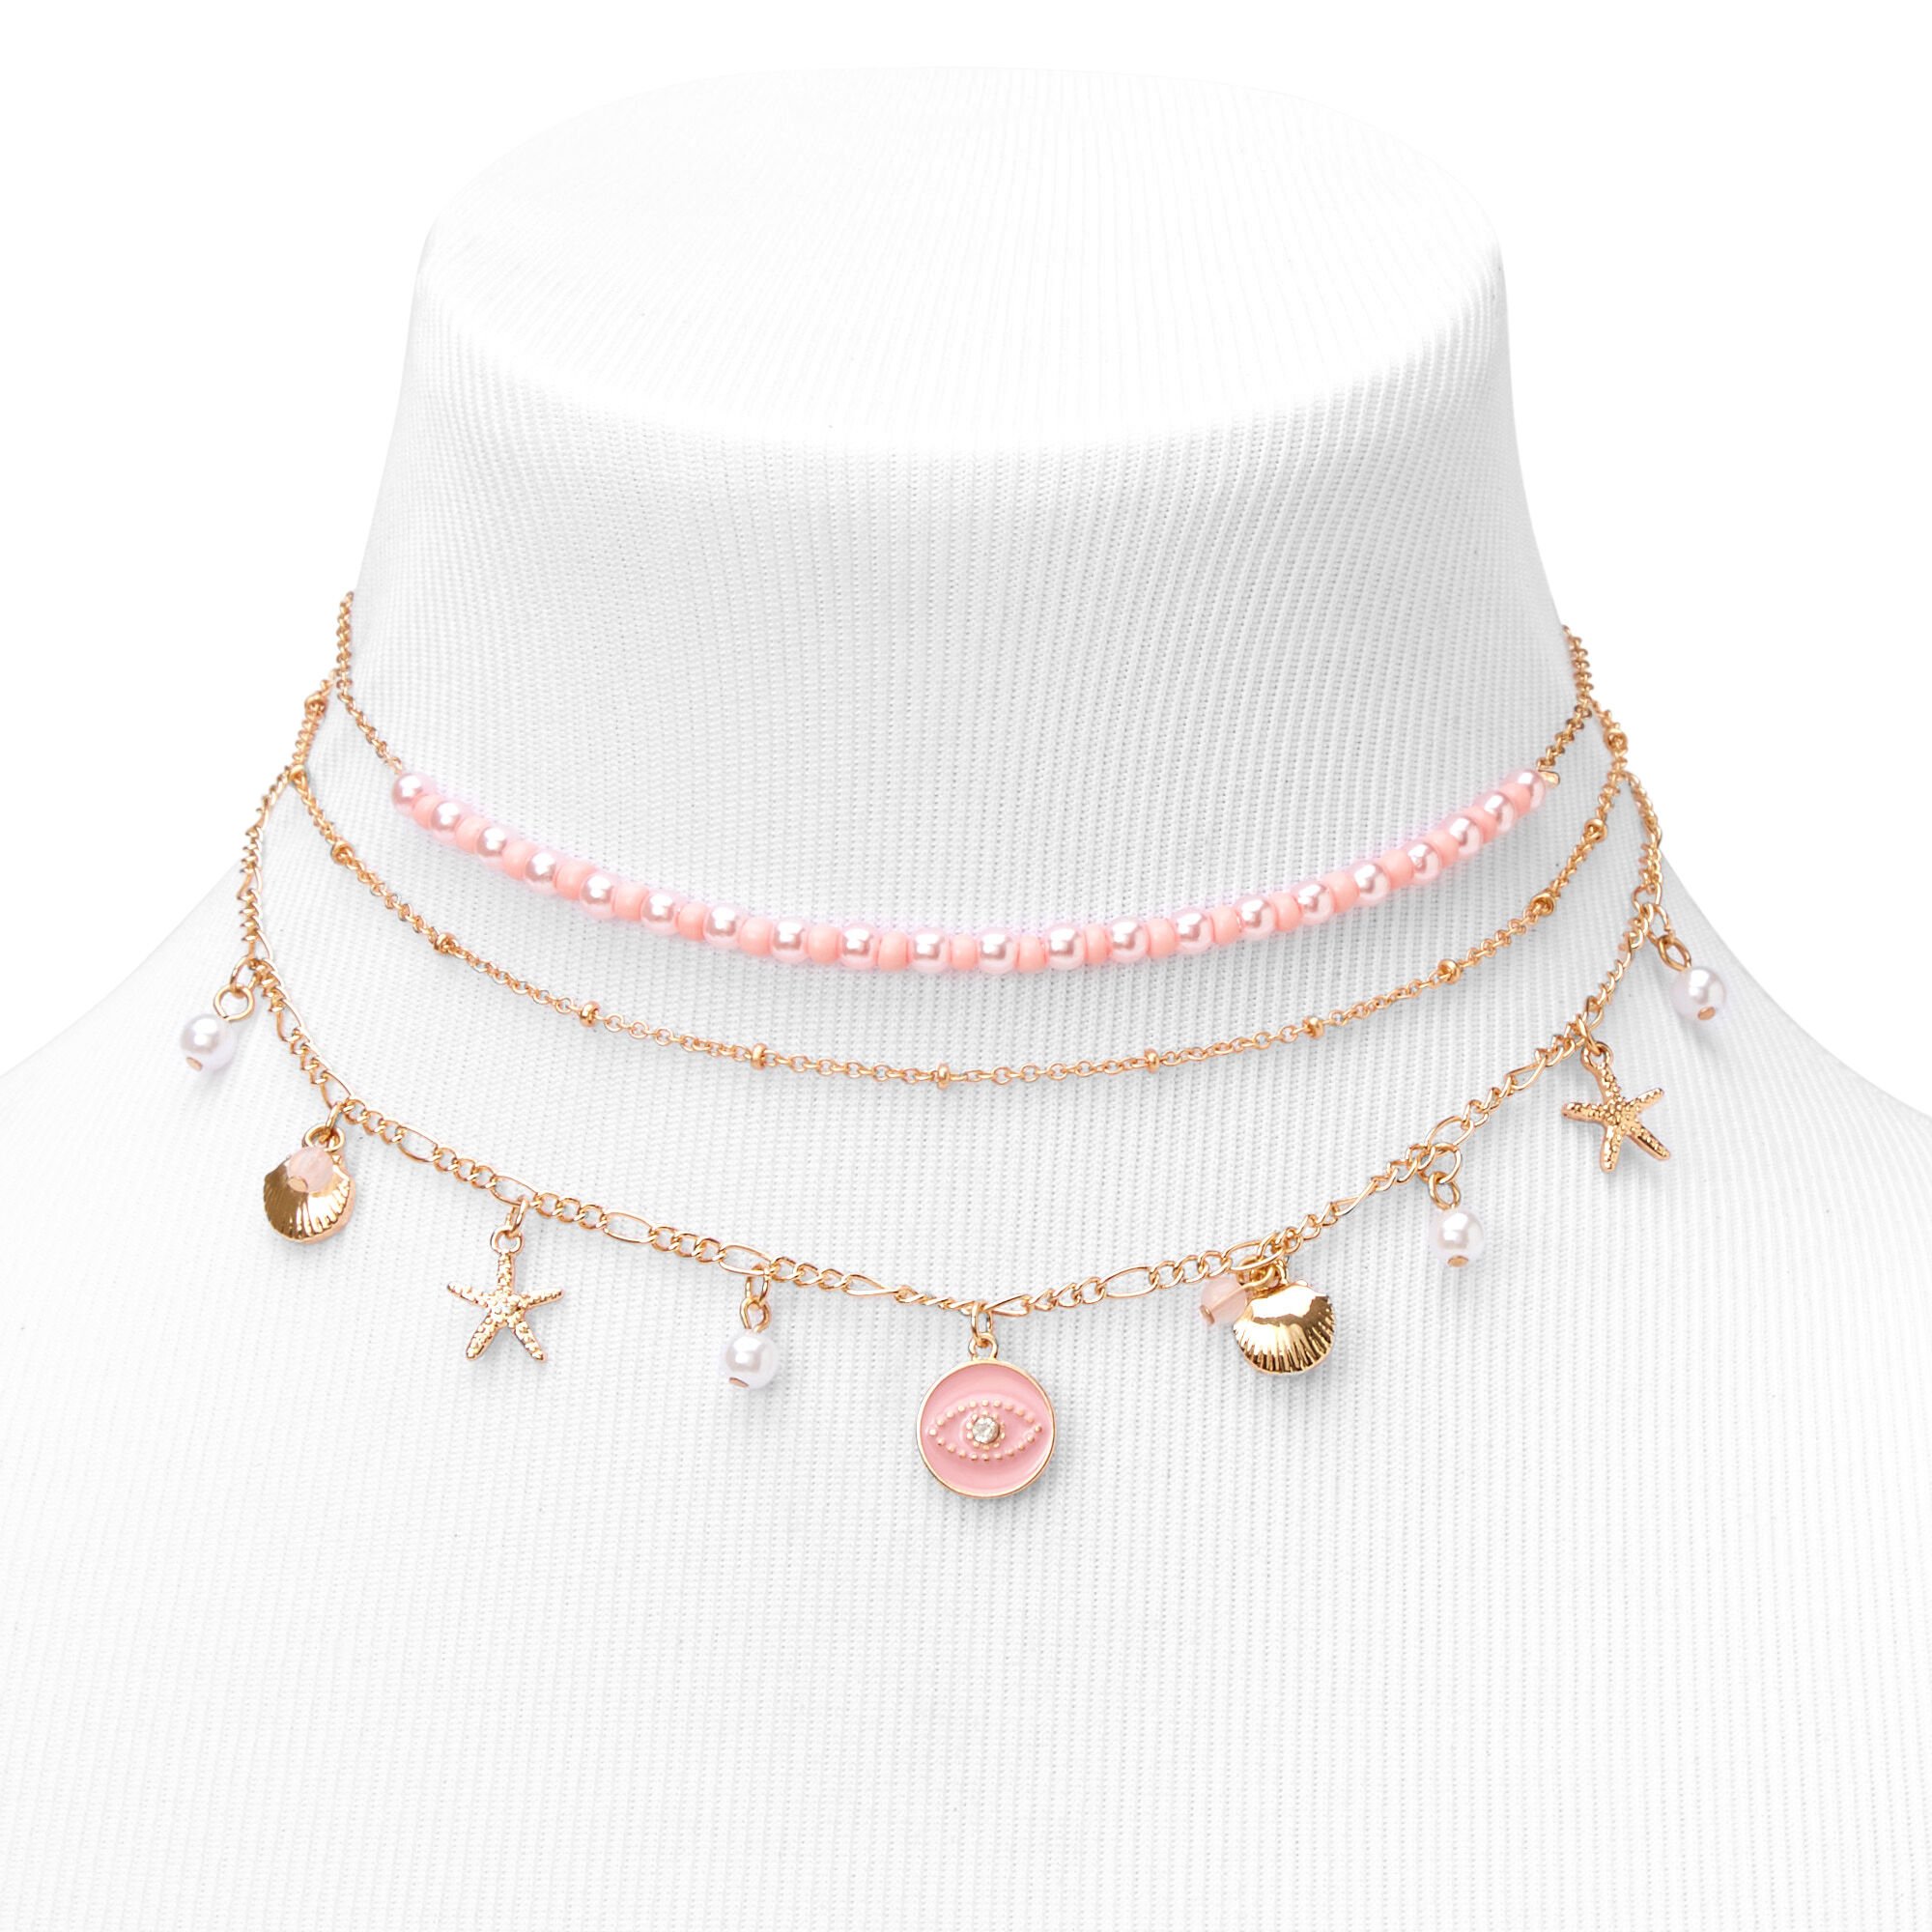 Luscious Pink Opal Bead Necklace with Diamond Beads and Clasp in 14K Gold —  JOON HAN